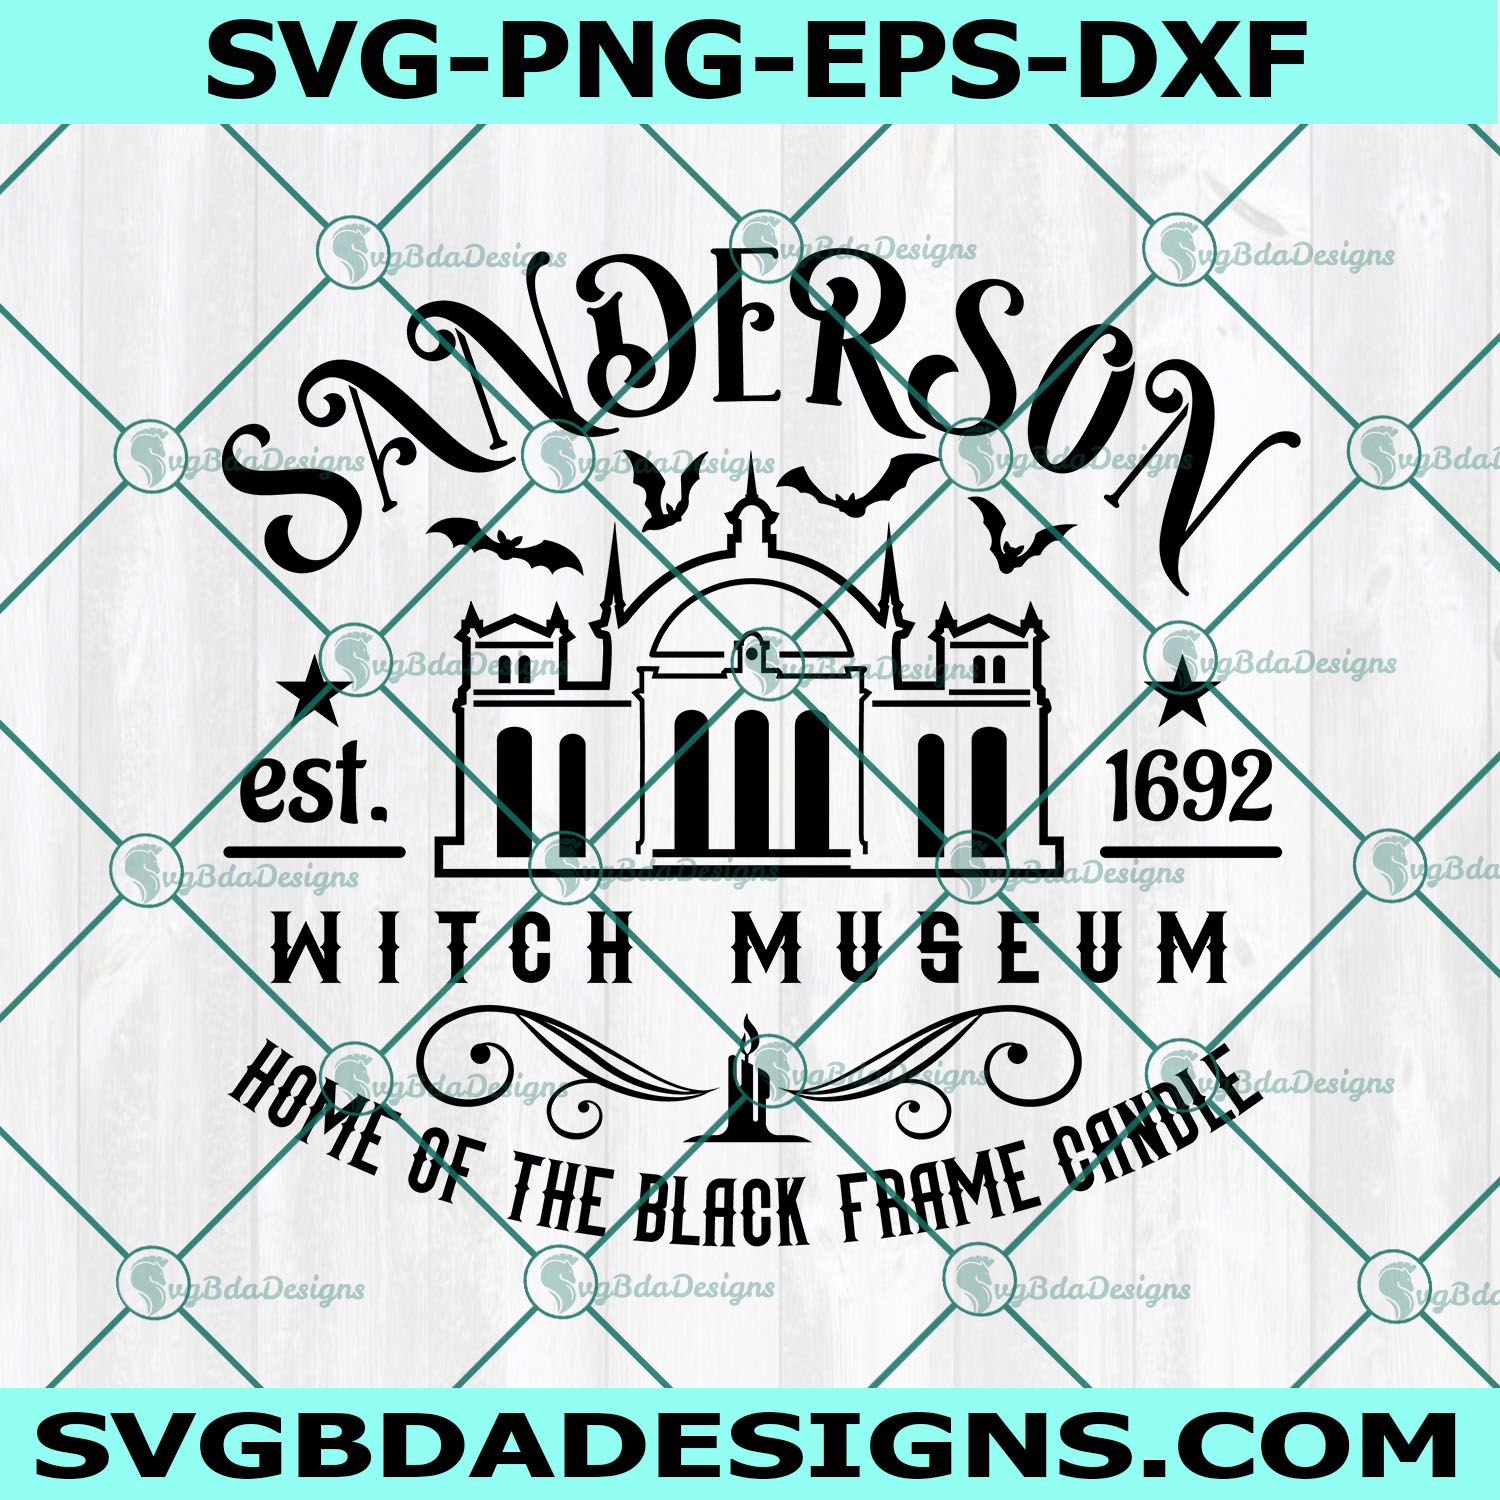 Sanderson Witch Museum Svg, Witch Museum Svg, Hocus Pocus Svg, Sanderson Sisters Svg, HOcus Pocus Halloween Svg, File For Cricut